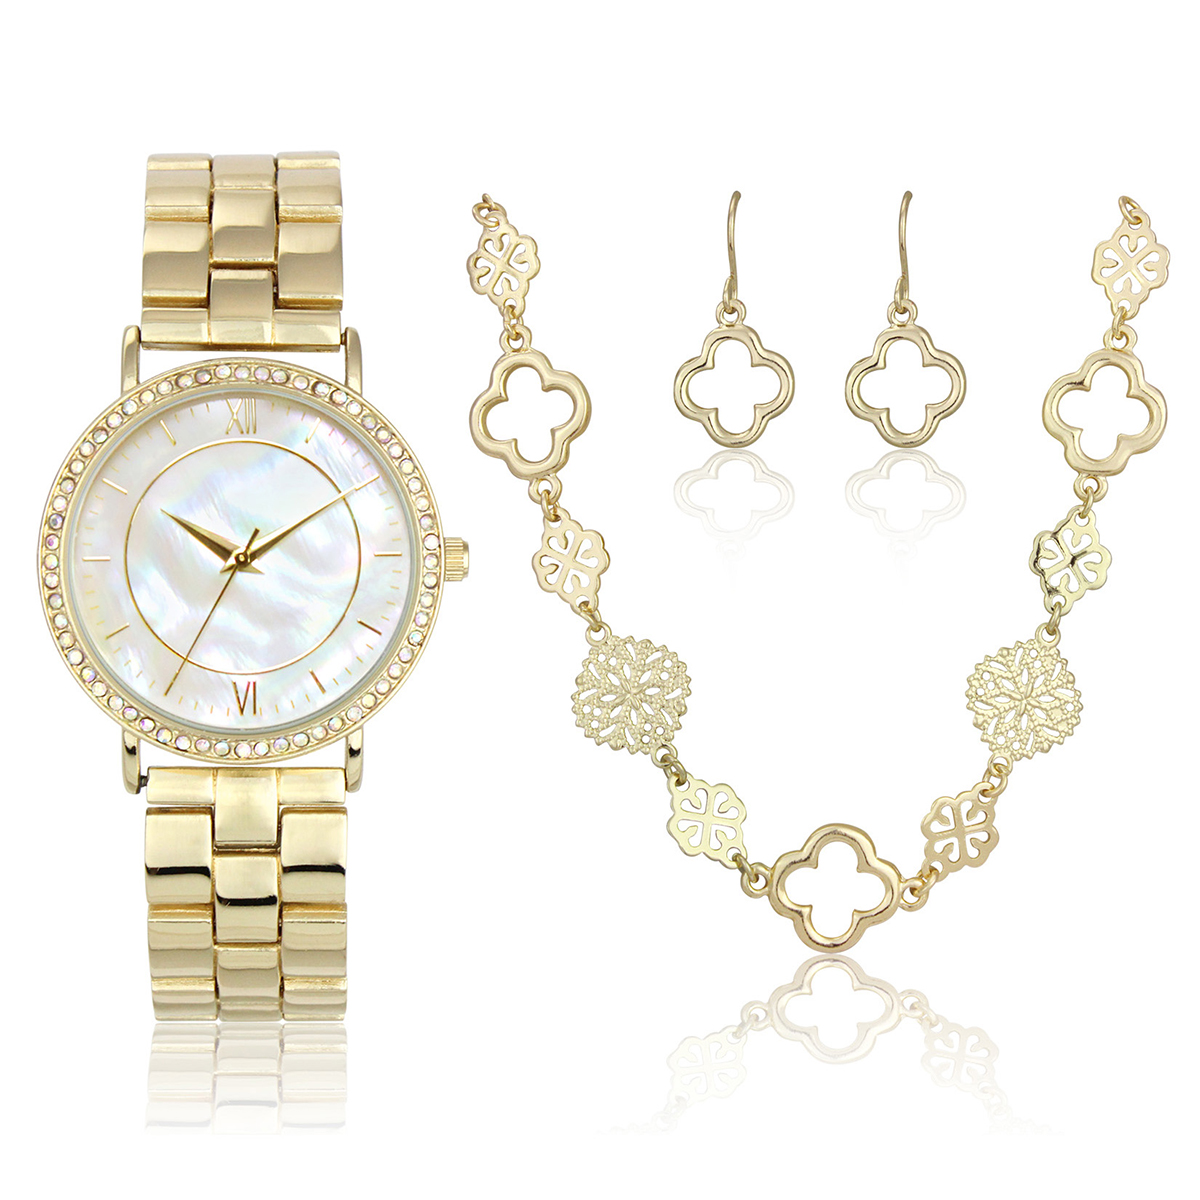 Womens Daisy Fuentes Watch Necklace & Earring Set - DF162GD